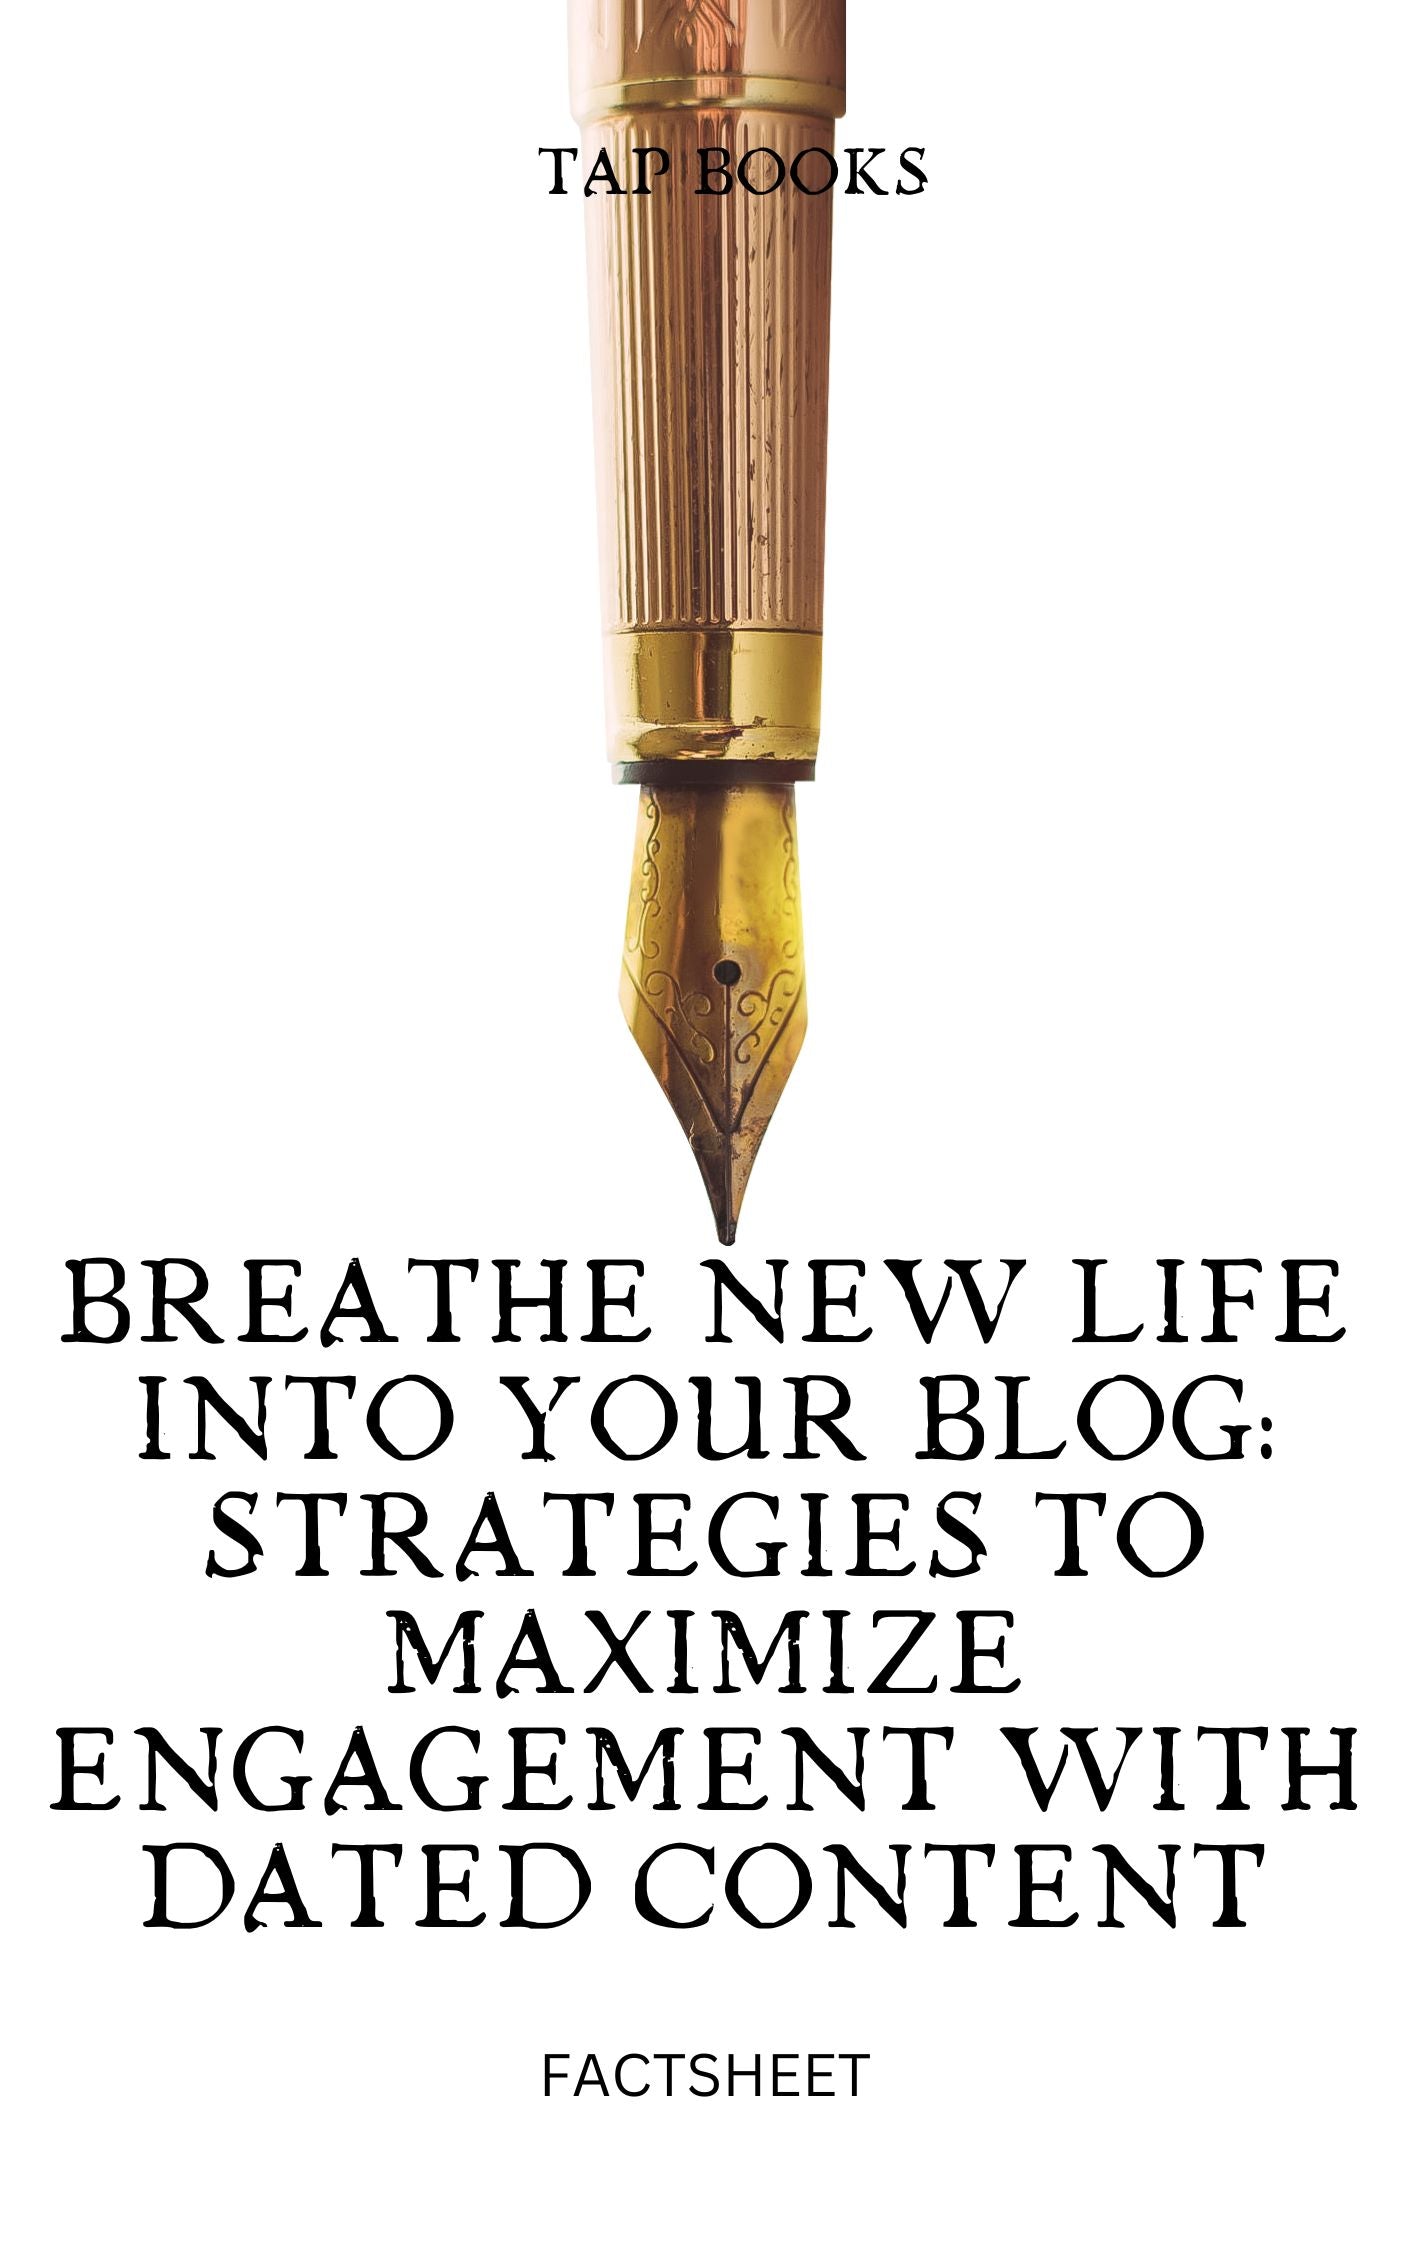 FACT SHEET Breathe New Life into Your Blog - Strategies to Maximize Engagement with Dated Content - Try A Prompt